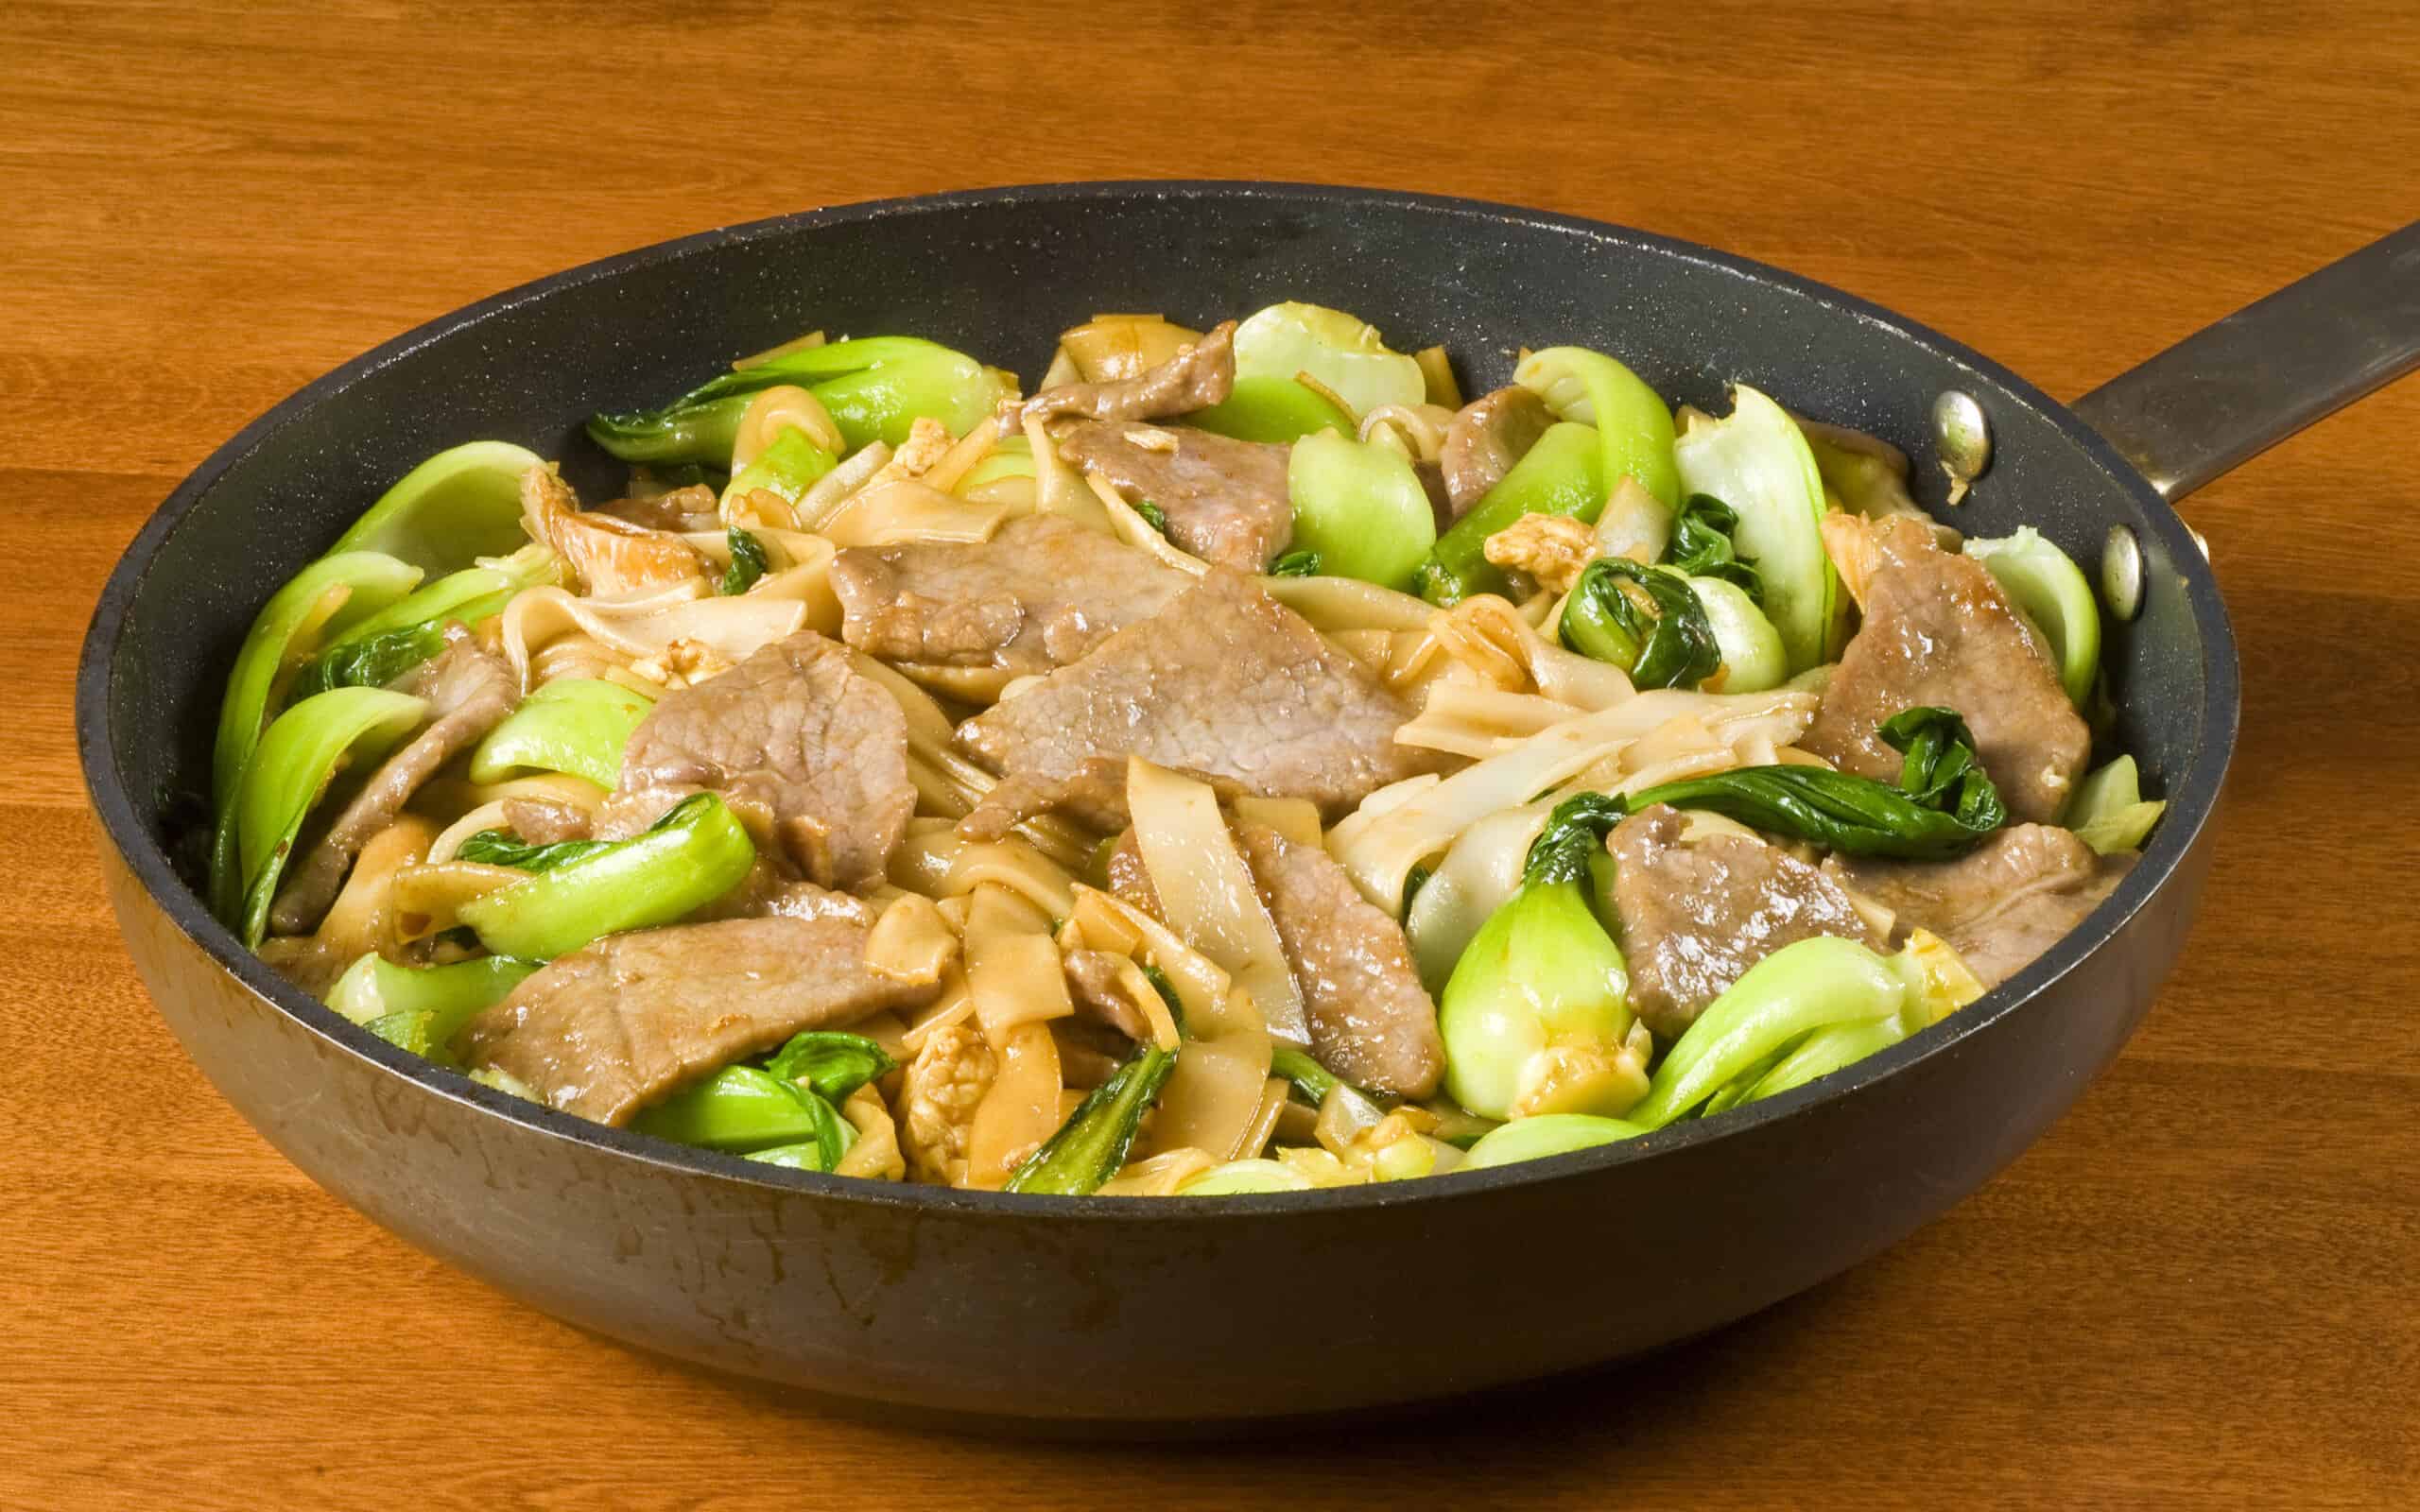 Rice Noodles and Beef Stir Fry